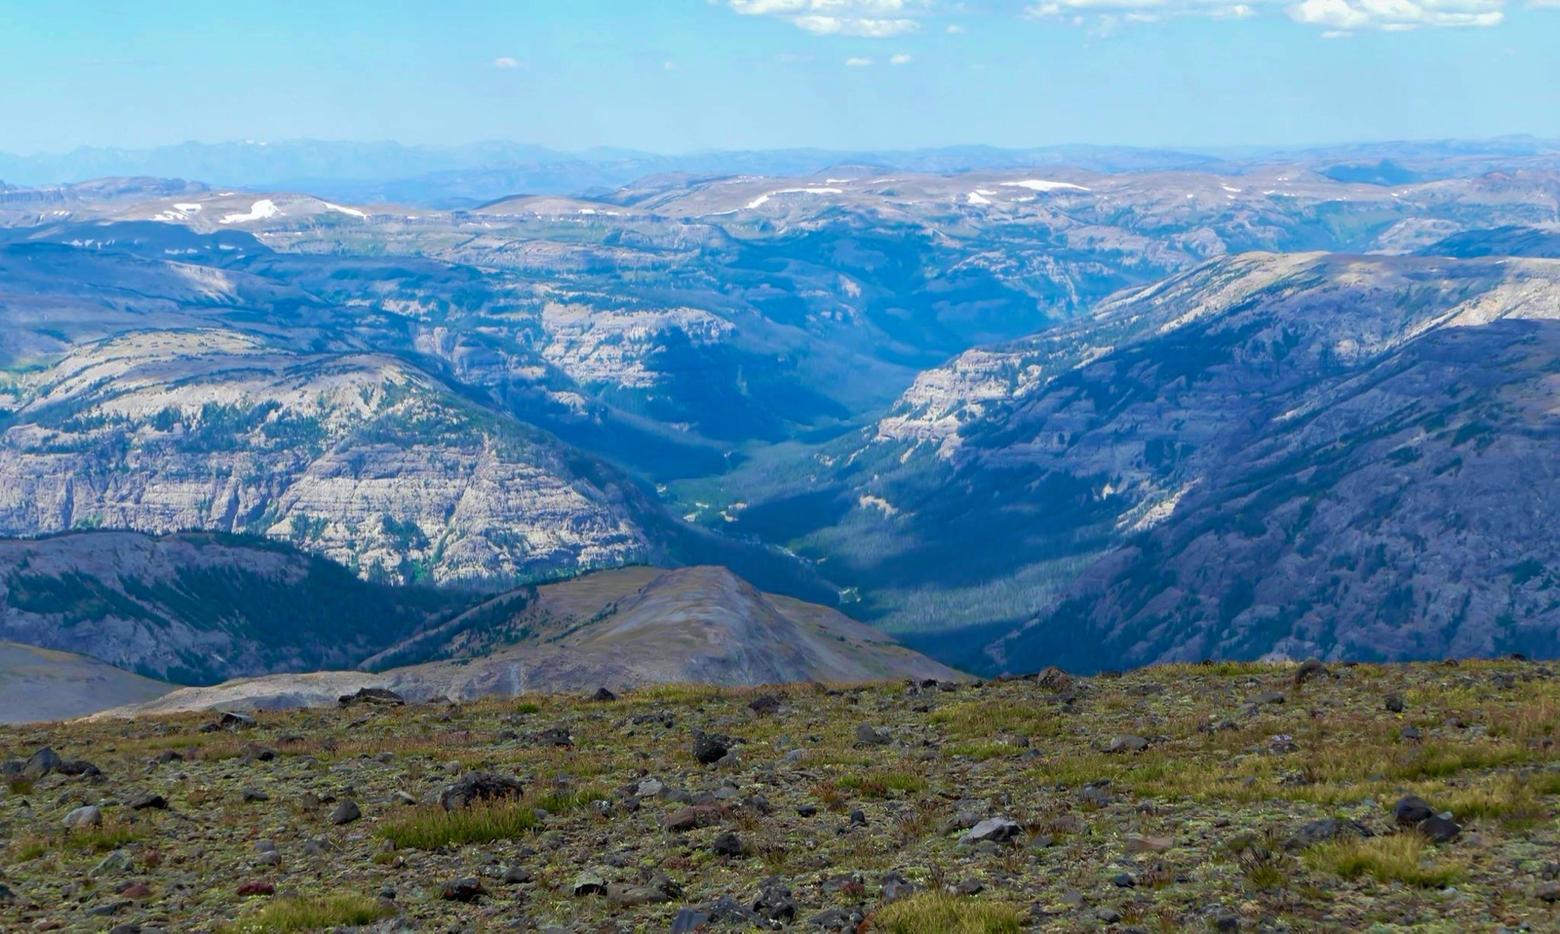 Most of all, Yochim appreciated entering the roadless Thorofare, one of the most remote places in the Lower 48 and formed by an intersection of national park and forest. This photograph offers a view of the headwaters of the Yellowstone River looking west from the top of Younts Peak in the Teton Wilderness of the Bridger-Teton National Forest south of Yellowstone. The North Fork and the South Fork of the Yellowstone river collect snowmelt from Younts Peak and meet just to the west of the mountain where the famous river begins its journey northward through the park. The area is home to many solitude-needing species free from large numbers of people. Photo courtesy Yellowstone National Park. 